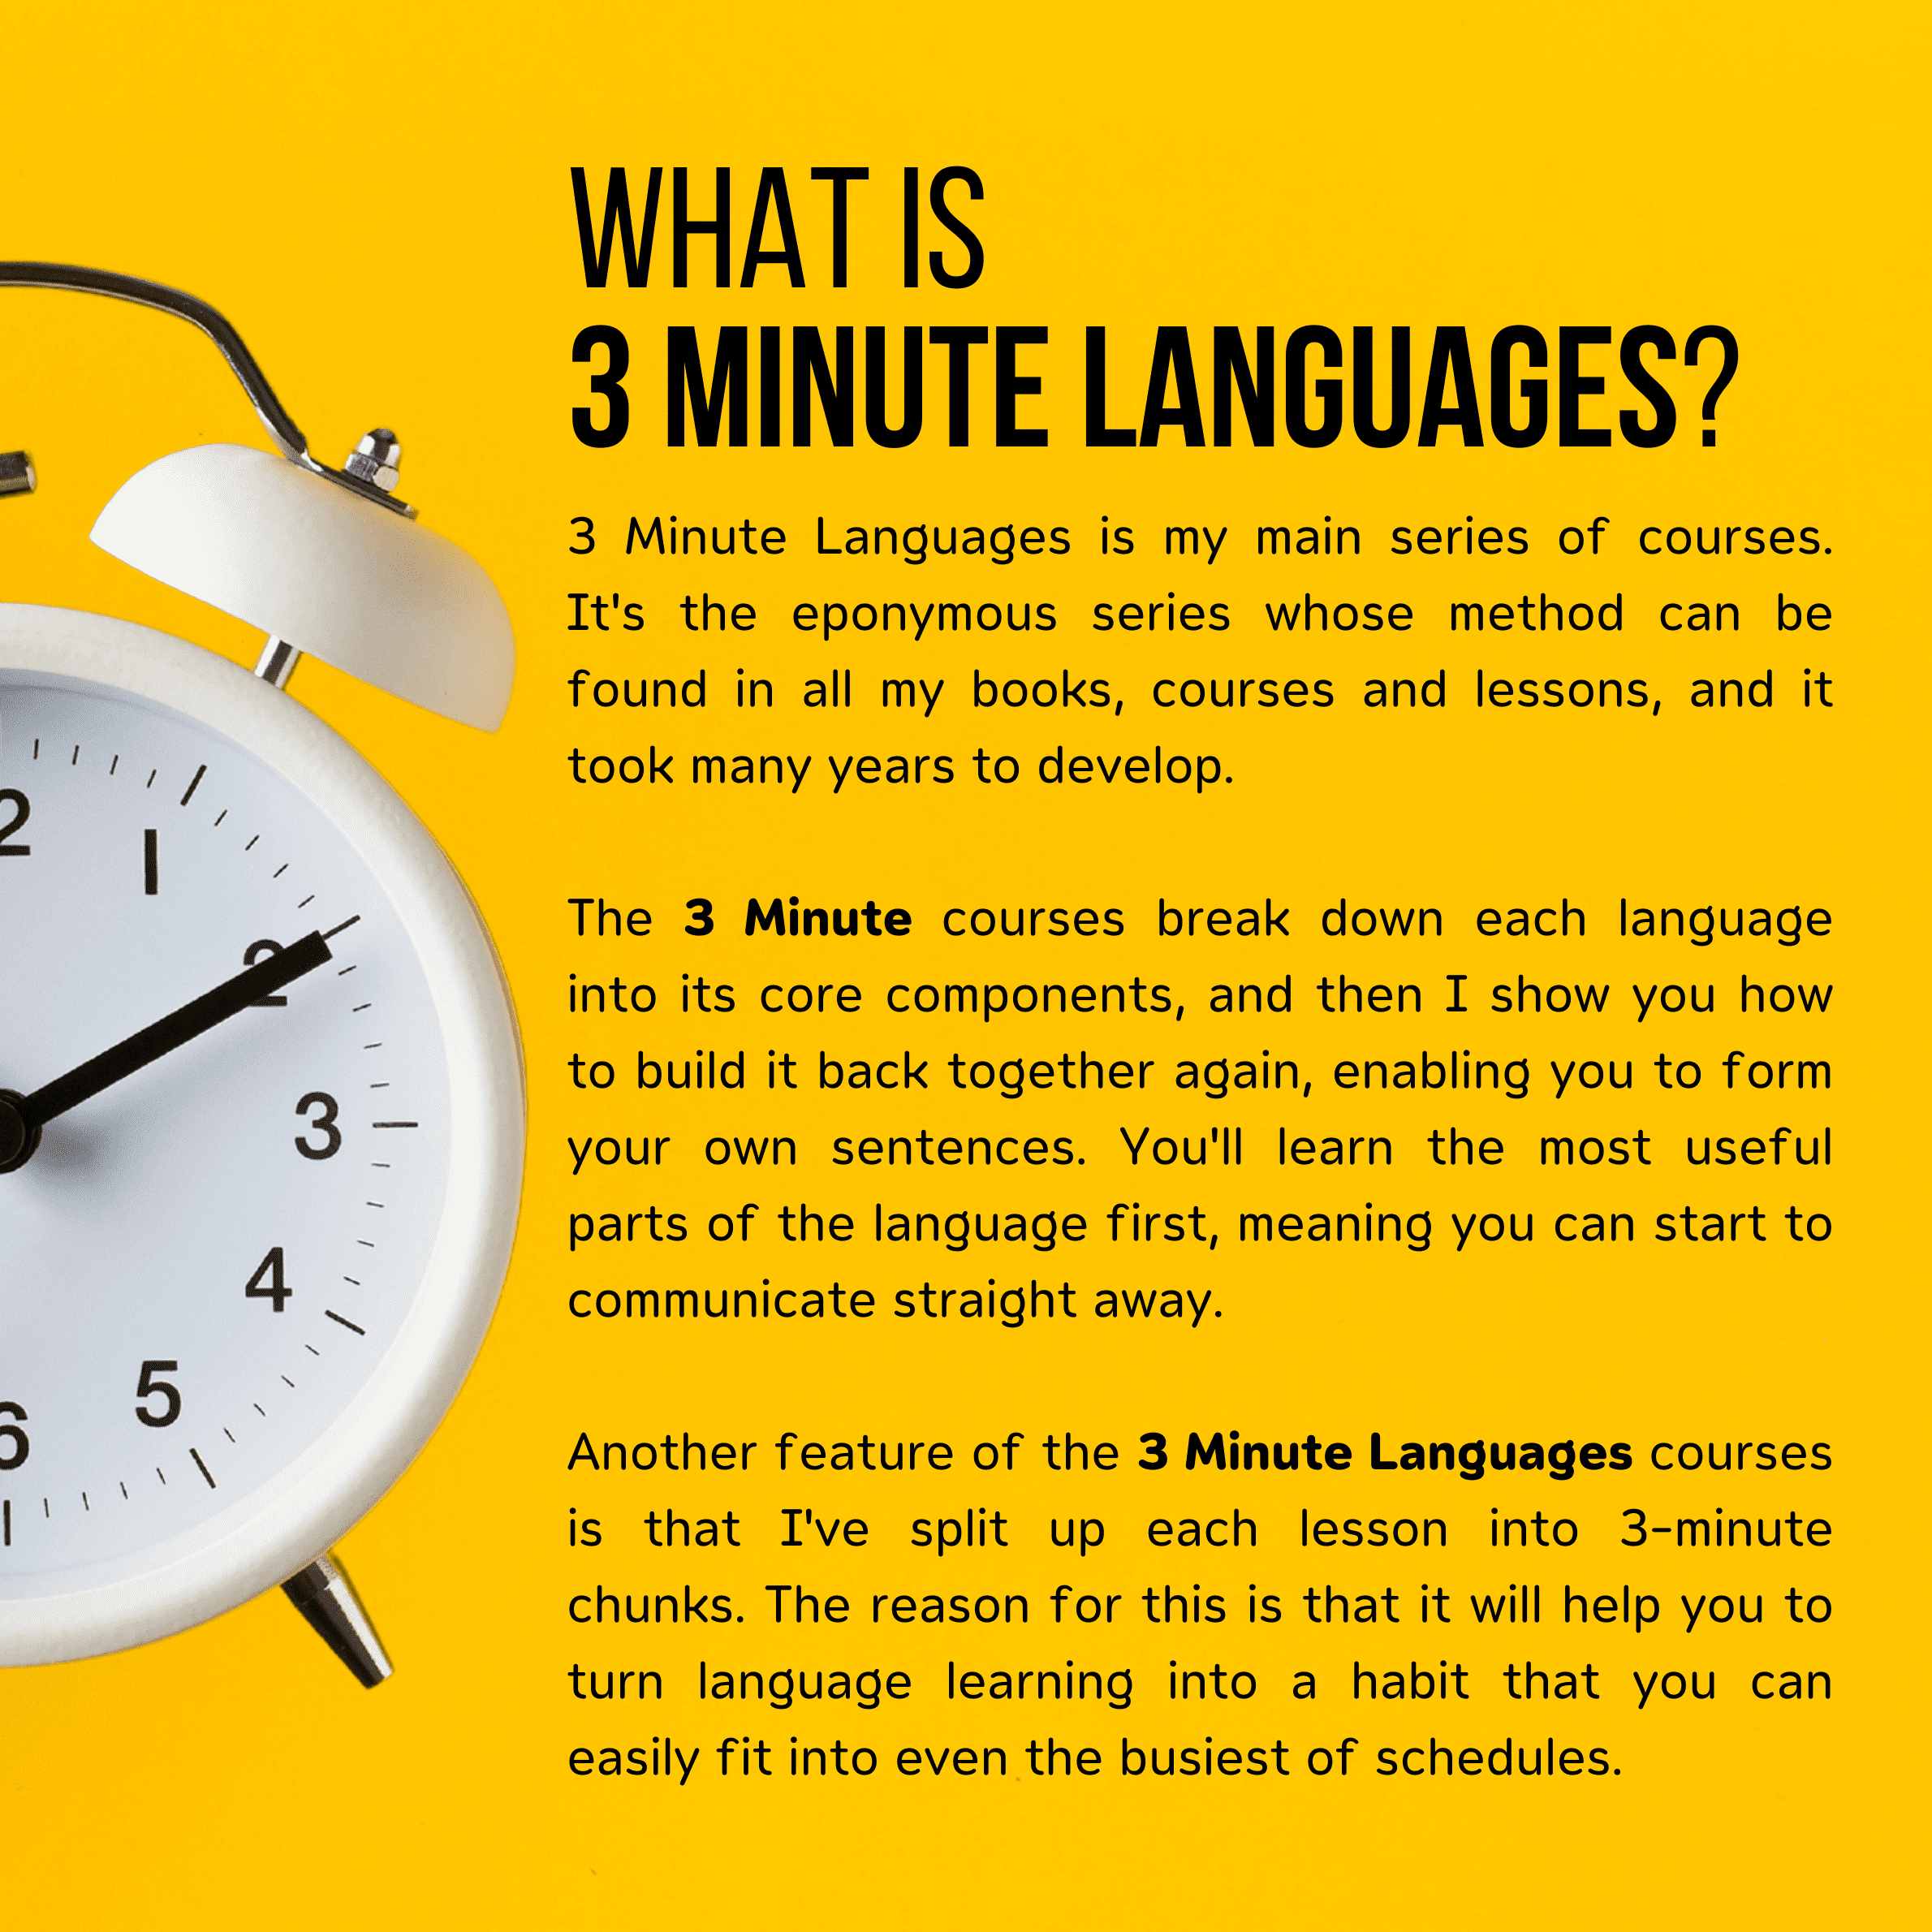 What is 3 Minute Languages?